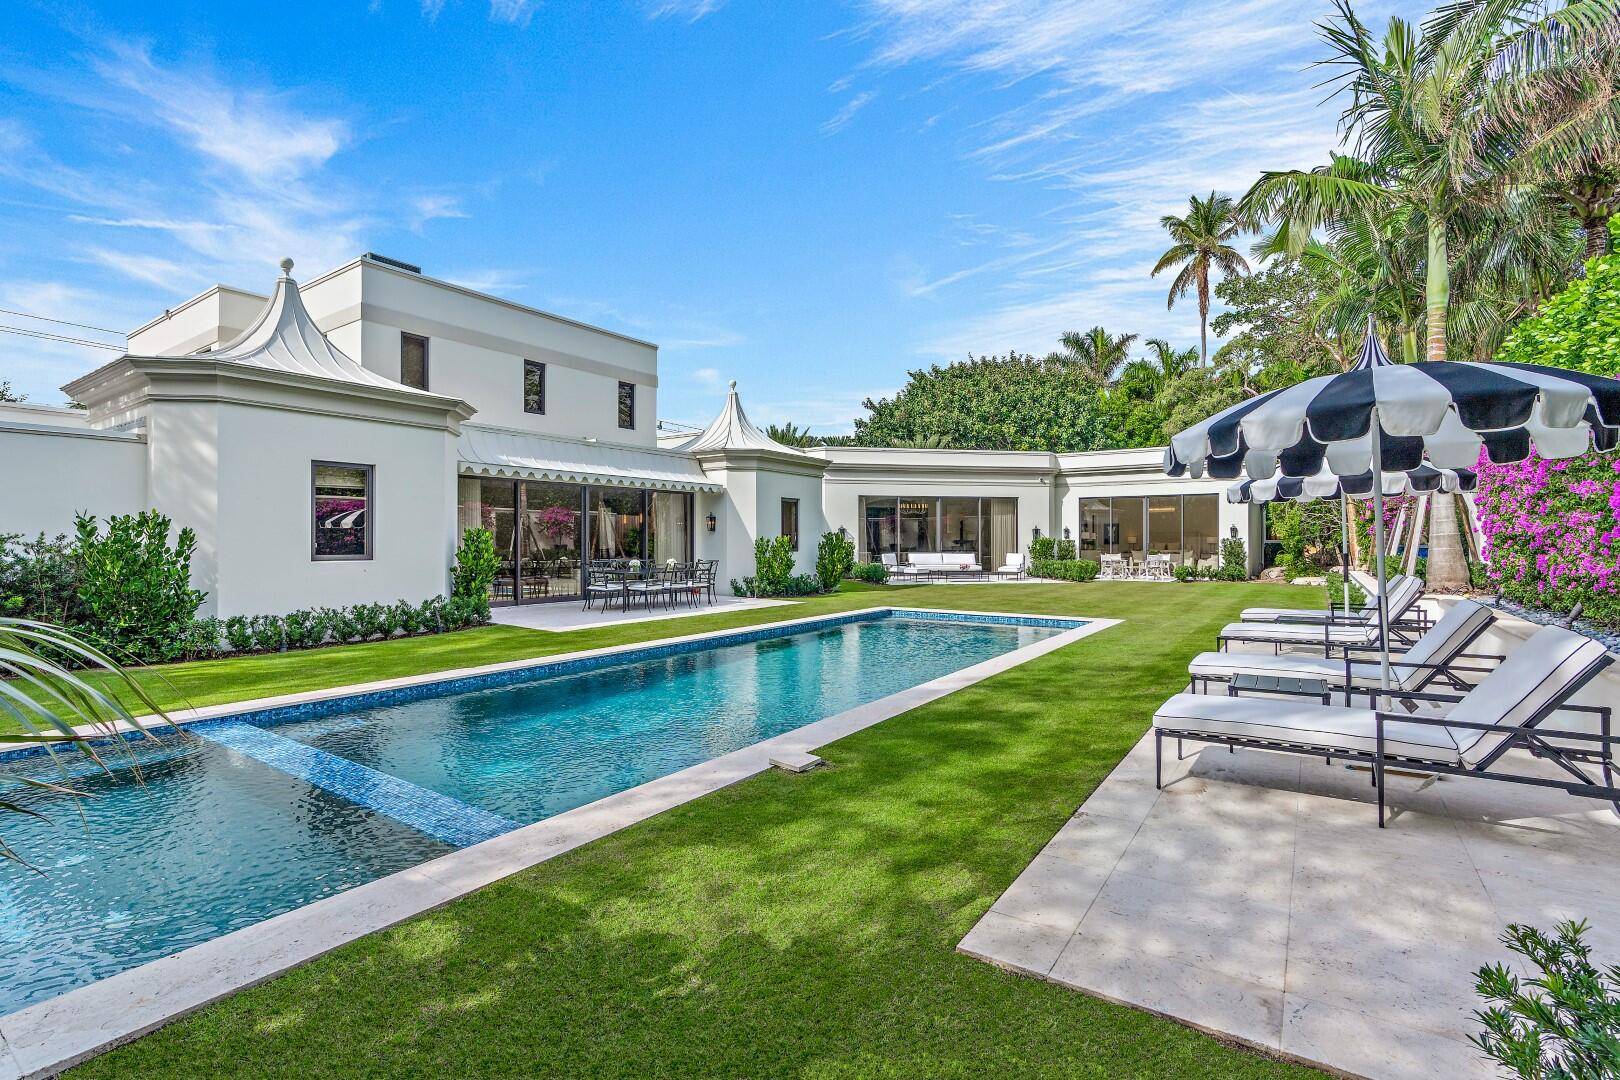 Stunning Palm Beach classic Regency estate with library, 7 bedrooms, 9 baths, and powder room.